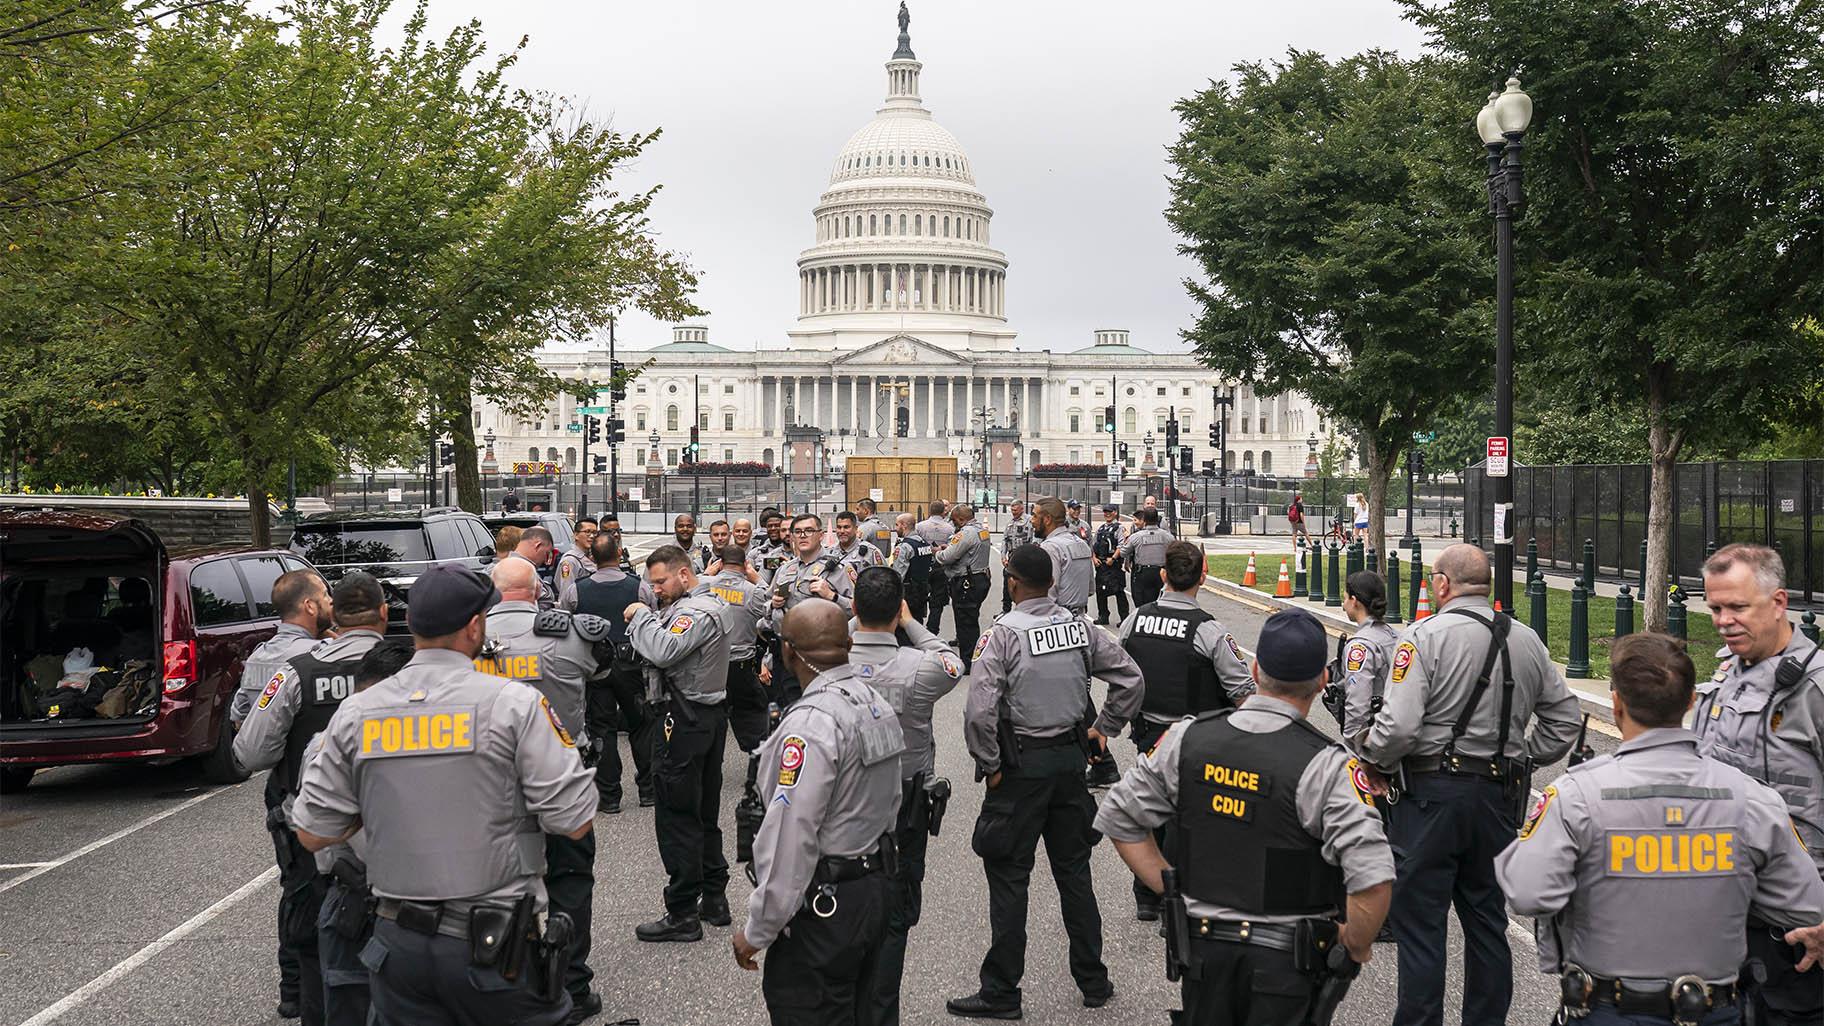 Police stage at a security fence ahead of a rally near the U.S. Capitol in Washington, Saturday, Sept. 18, 2021.  (AP Photo / Nathan Howard)